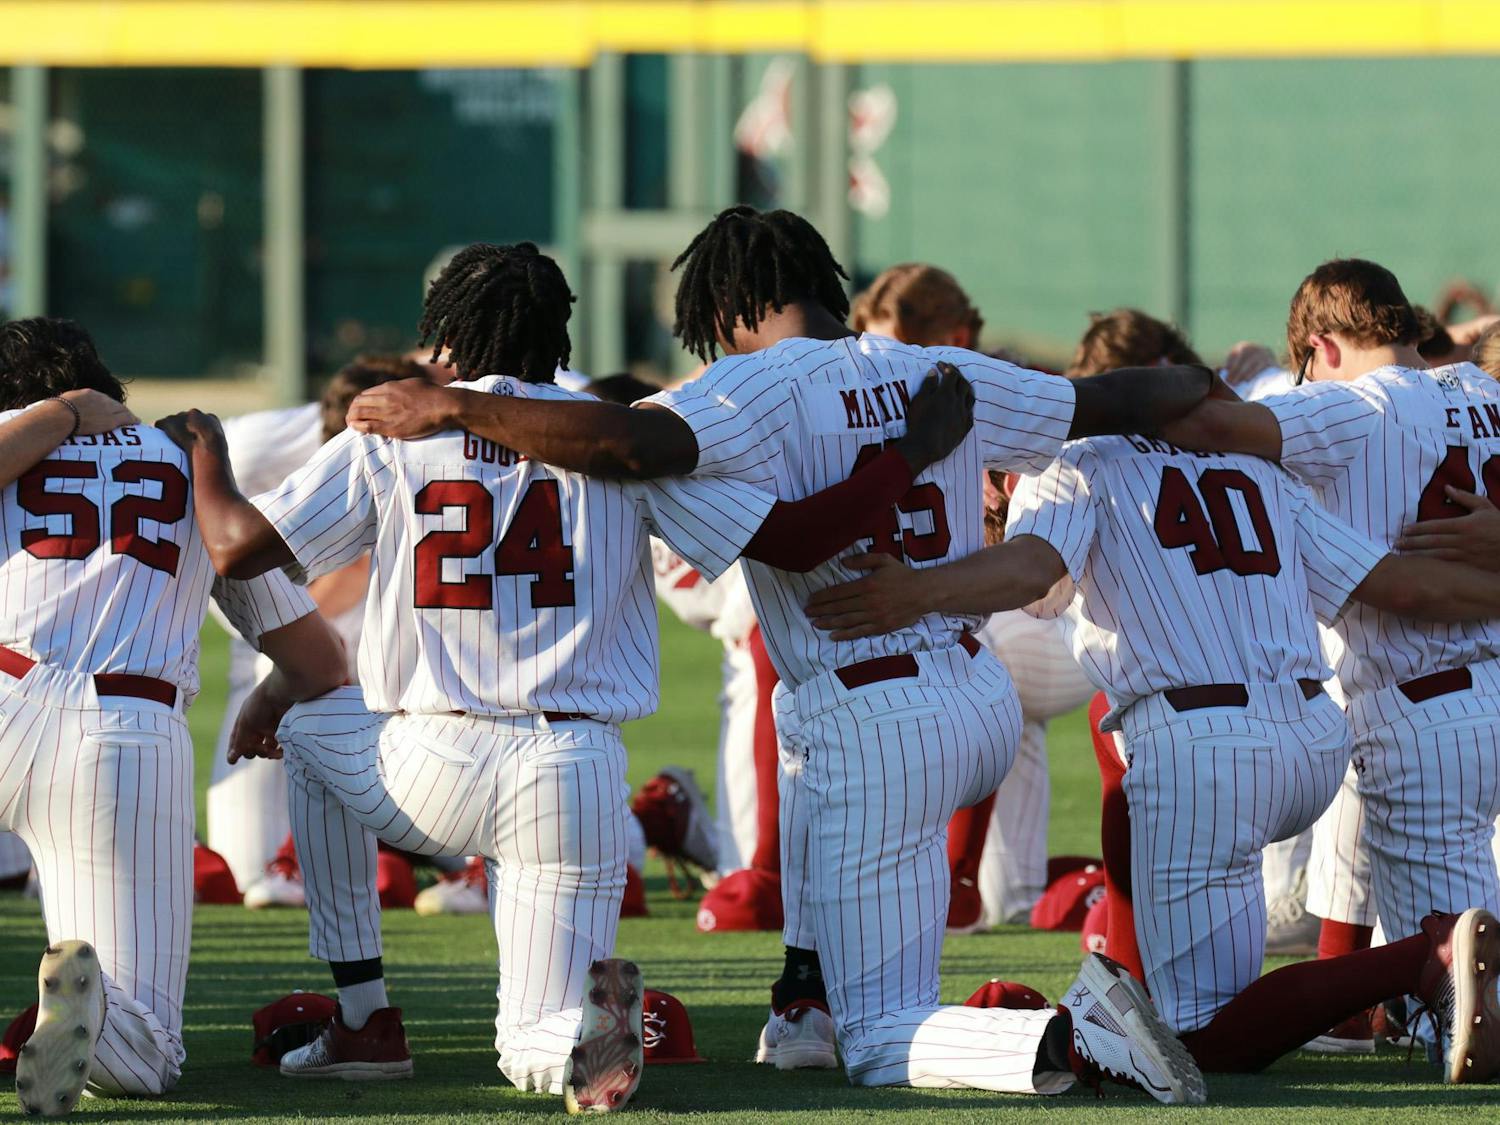 The No. 20 South Carolina baseball team lost its weekend series against No. 2 Arkansas 2-1, bringing its record to 27-13 on the season. While the ɫɫƵs were able to pull off a 6-3 win on Saturday afternoon, it fell to the Razorbacks on Friday and Saturday night. Next up, South Carolina will face No. 3 Kentucky on Friday, April 26, 2024, at 7 p.m. This will be the first of a three-game series.